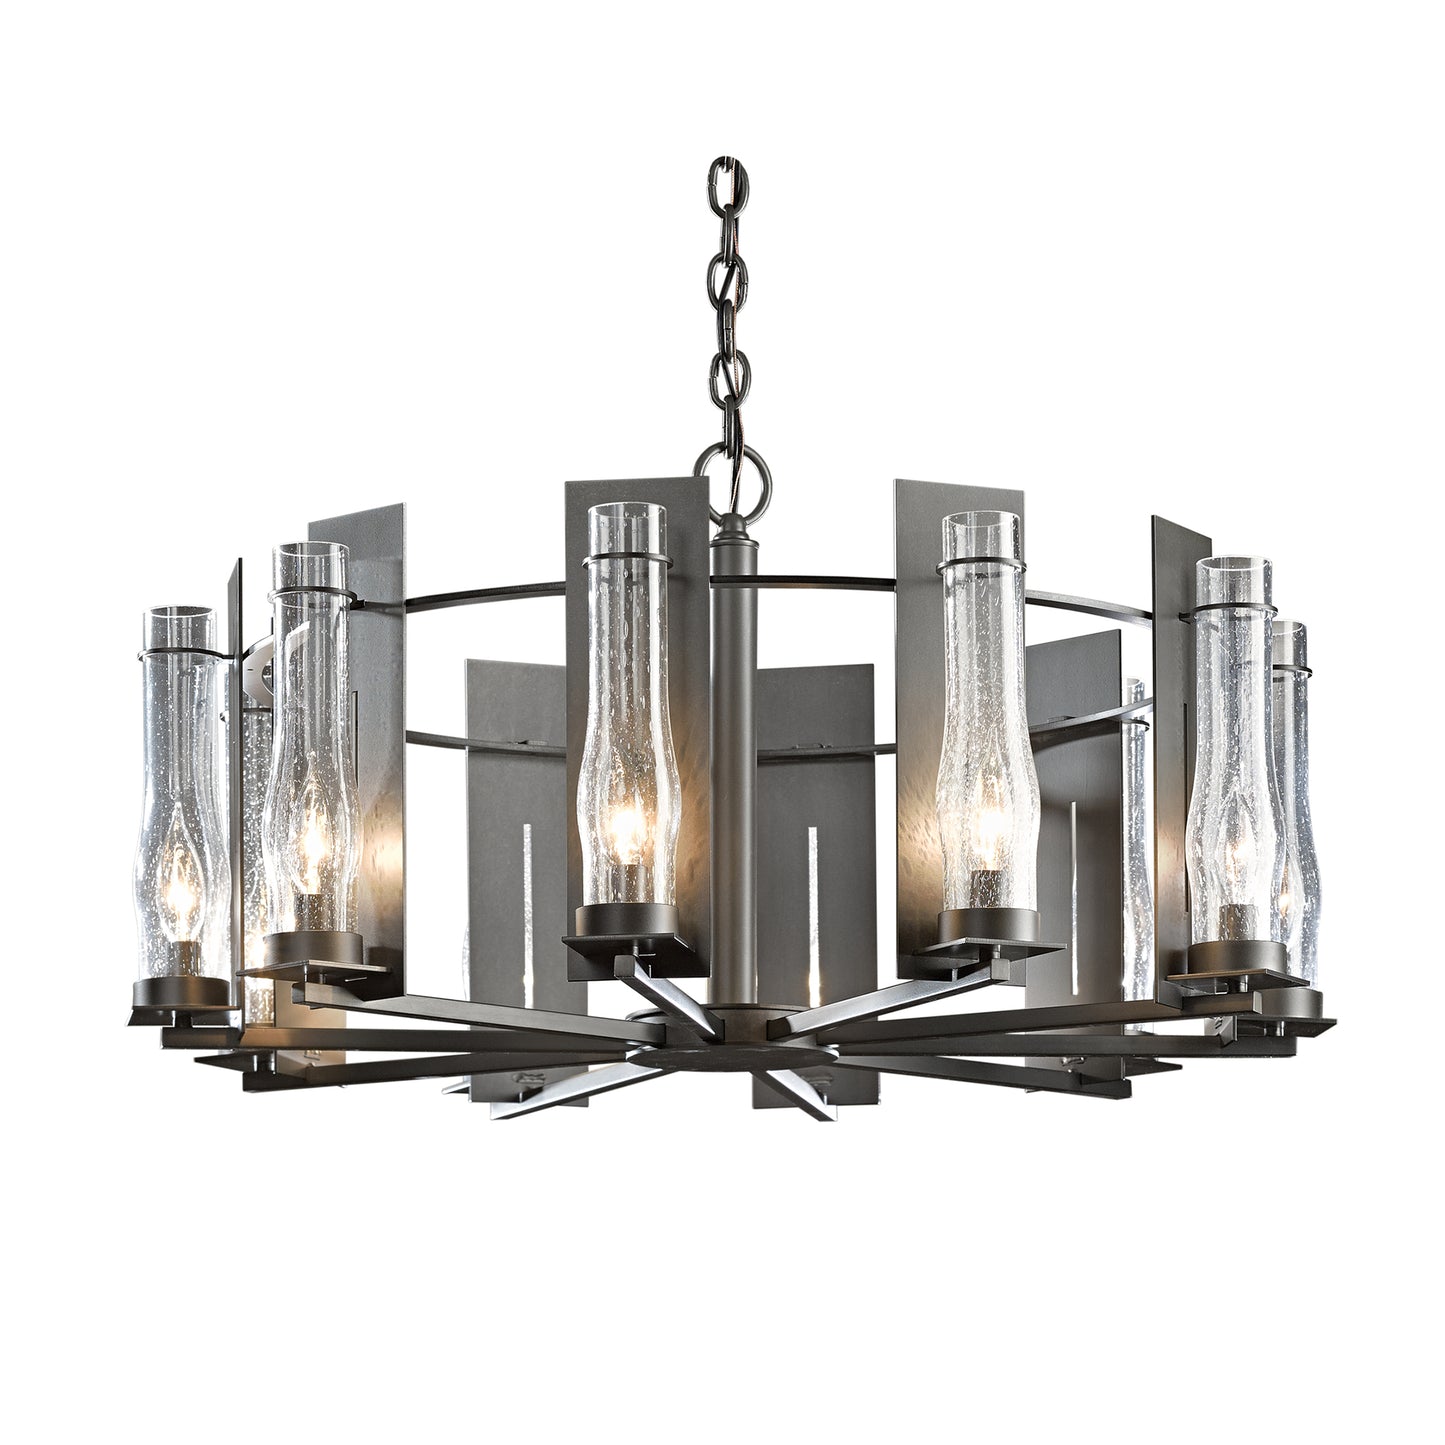 A Hubbardton Forge New Town 10-Arm Chandelier with a metal frame and glass cylinders.